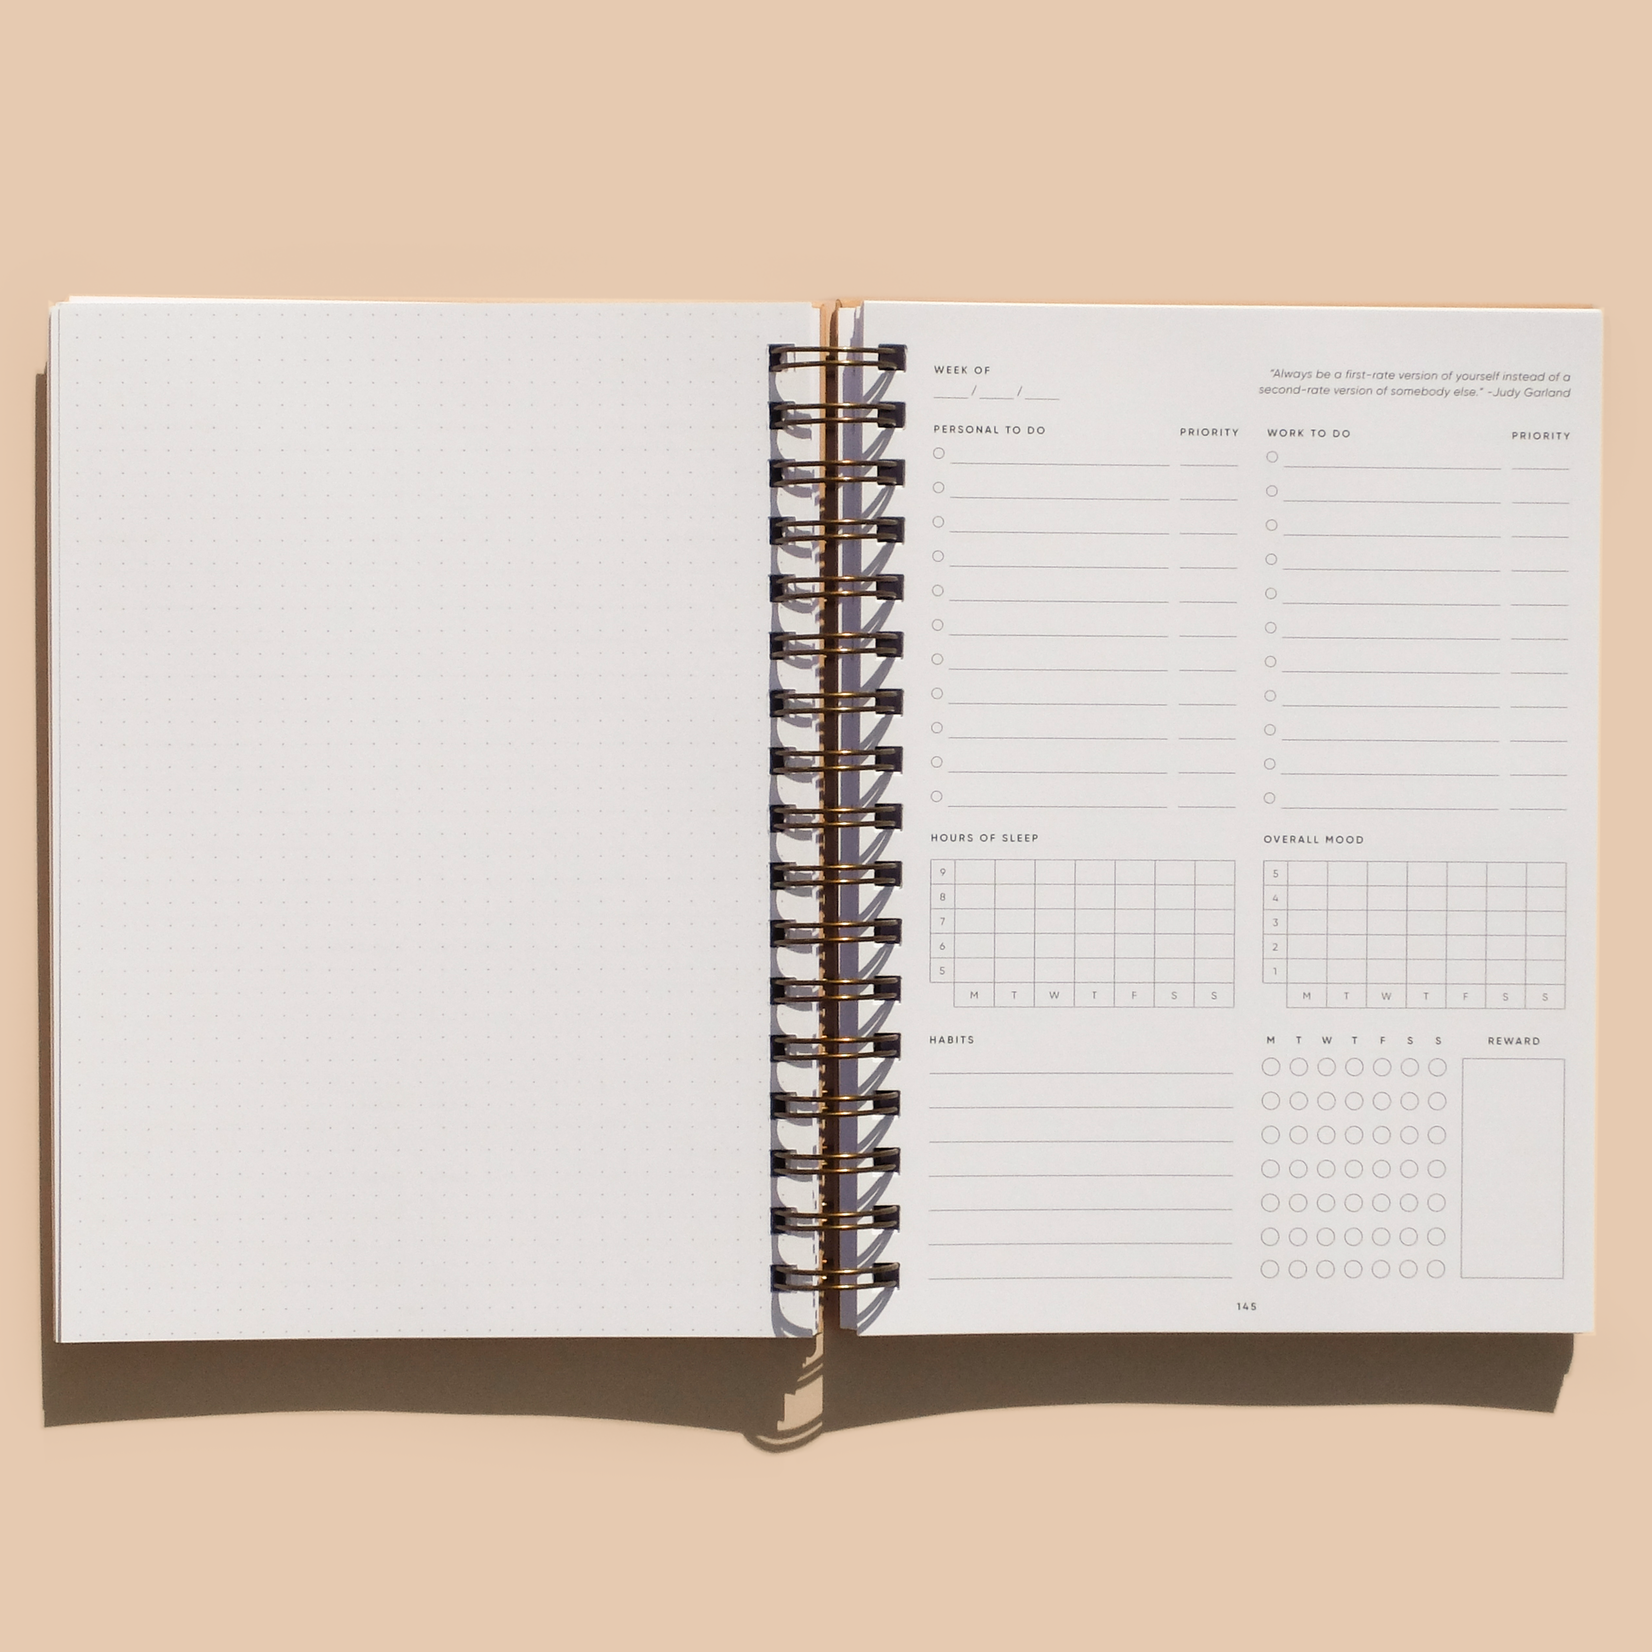 Simple Self The Self Care Planner Daily Edition - Blush